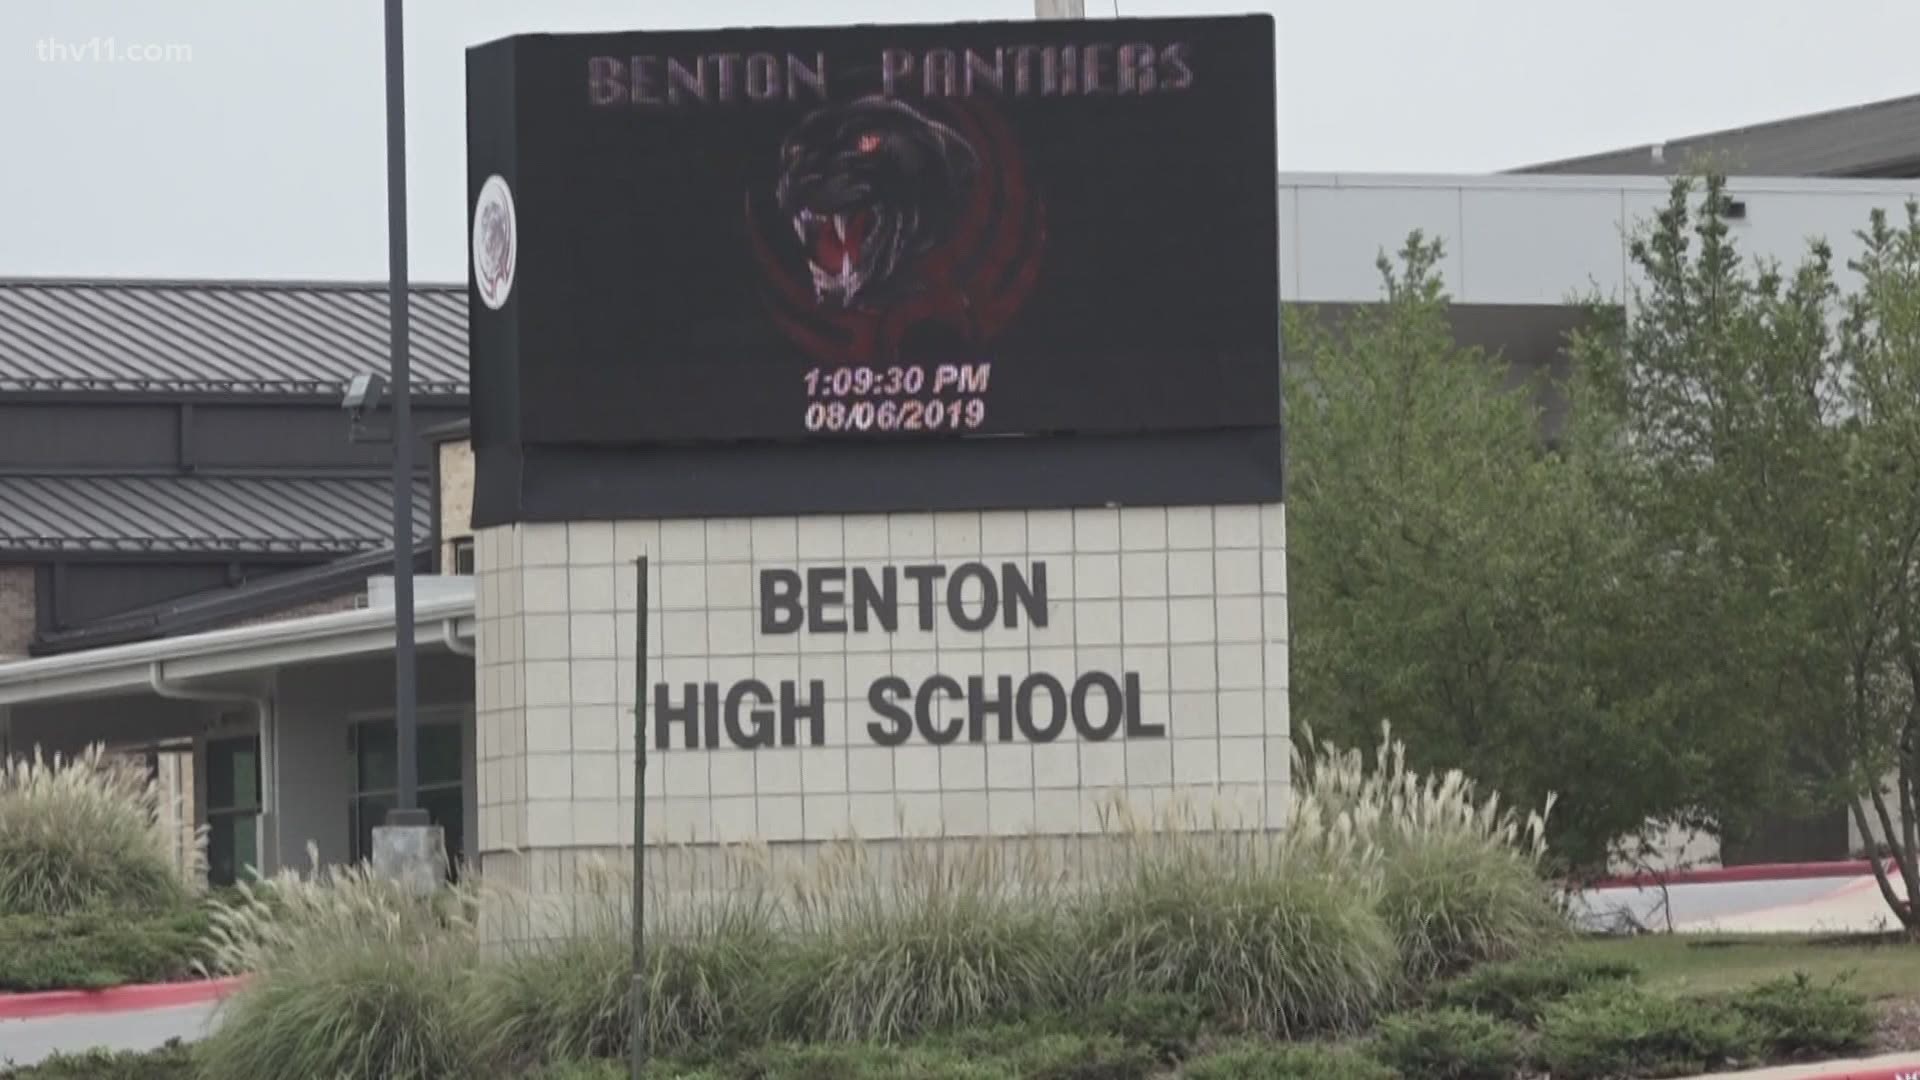 Public schools are beginning to release their official plans to reopen. The Benton School District is going to stagger on-campus days, surprising many parents.